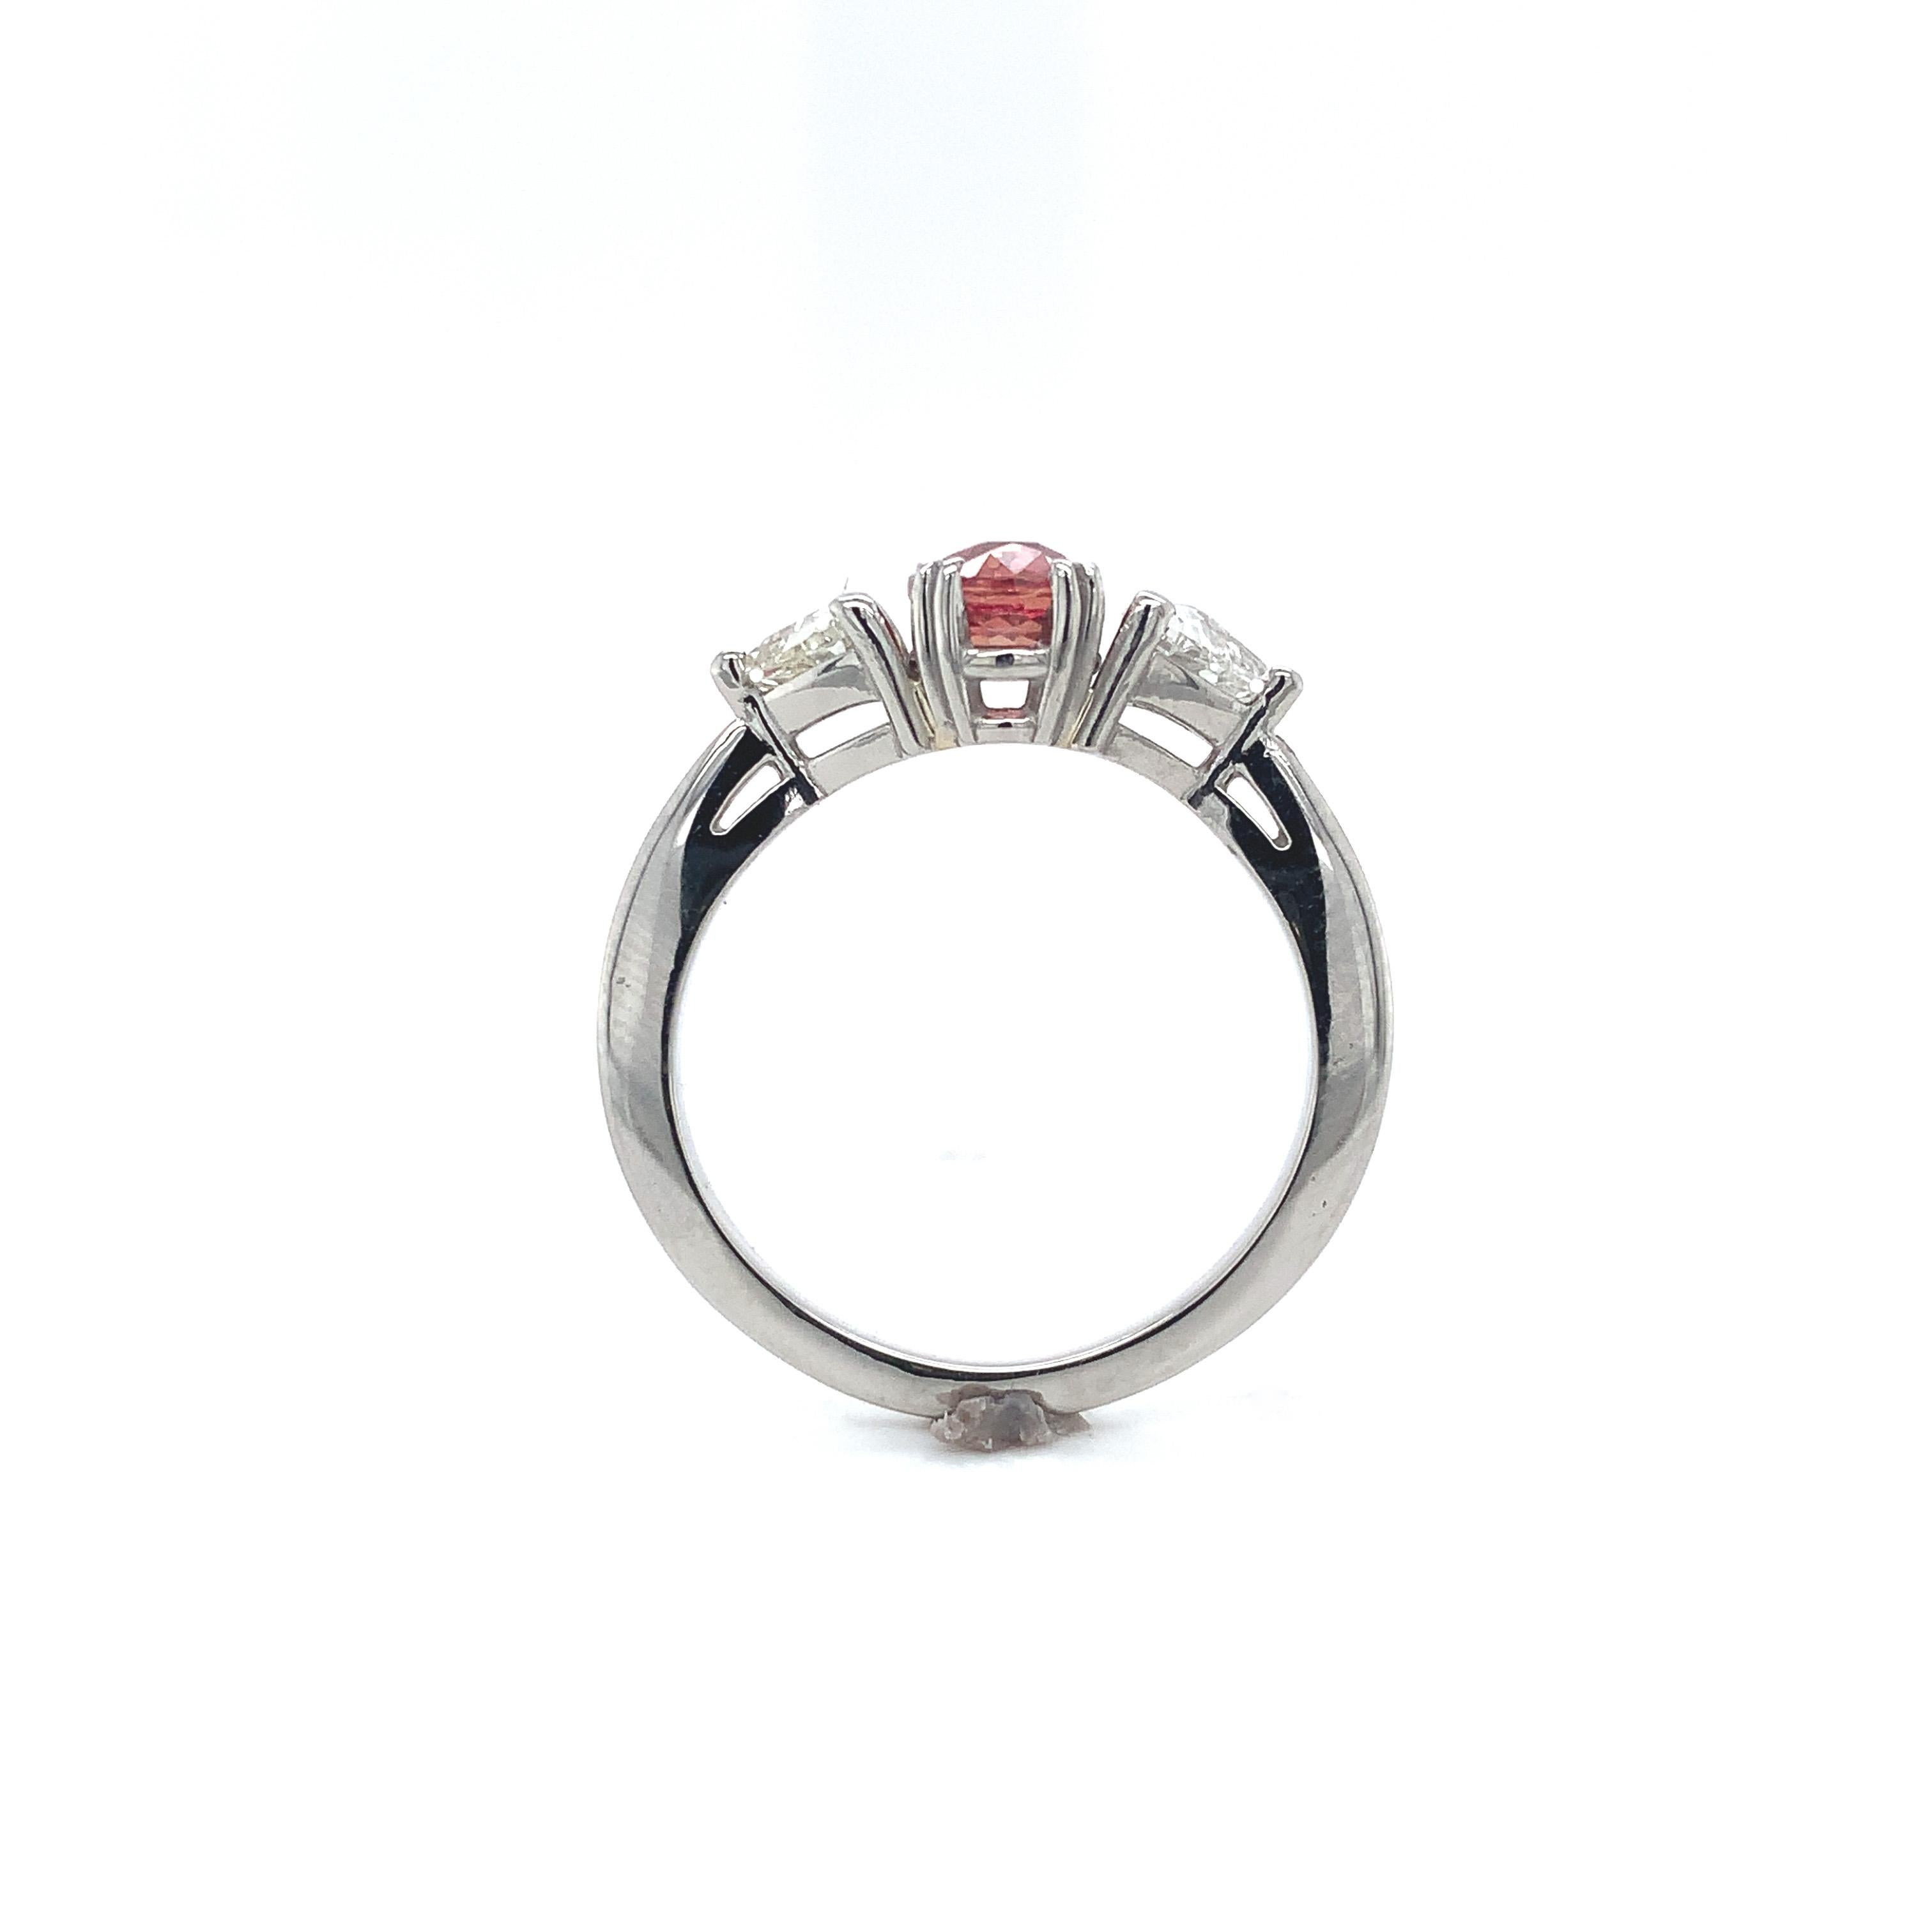 Platinum 3 stone ring featuring an oval natural padparadscha sapphire weighing 1.03 carats and diamonds. GIA report #2225462800 states natural sapphire measuring 6.62mm x 5.28 x 3035mm, stating pinkish orange color (with no other modifiers). The